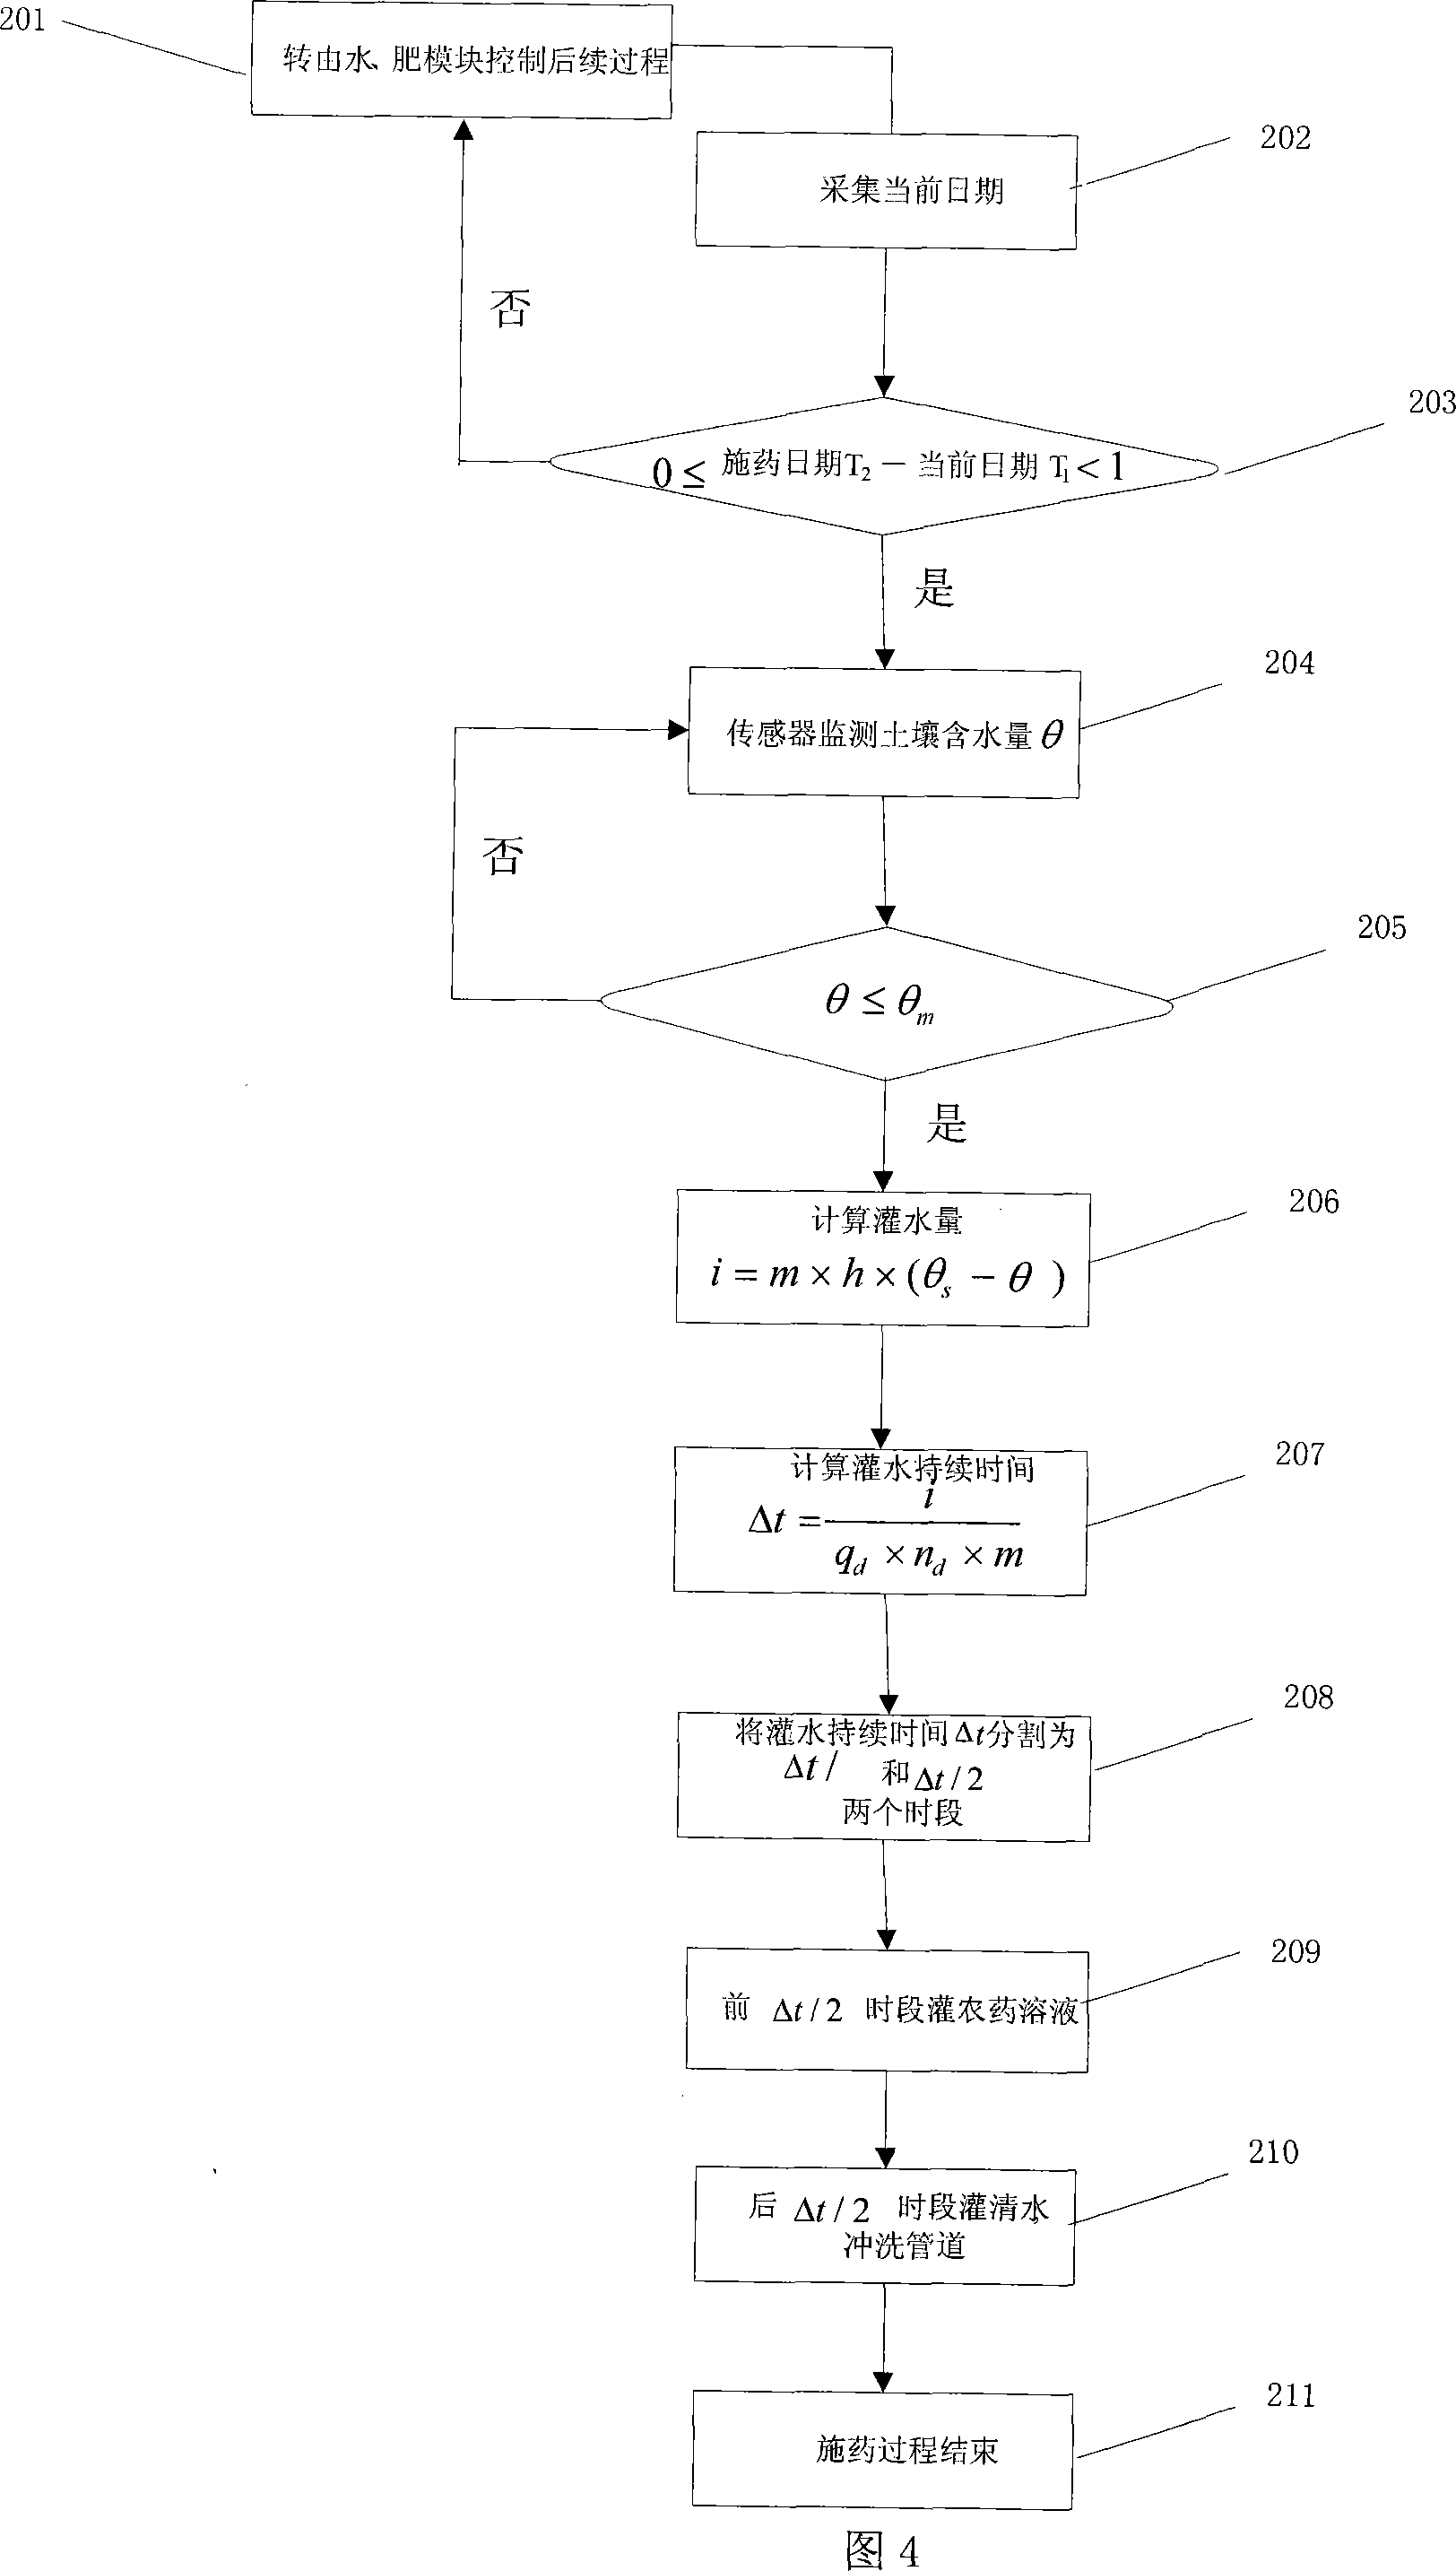 Automatic control system and method for trickle irrigation of water, fertilizer and drug underground